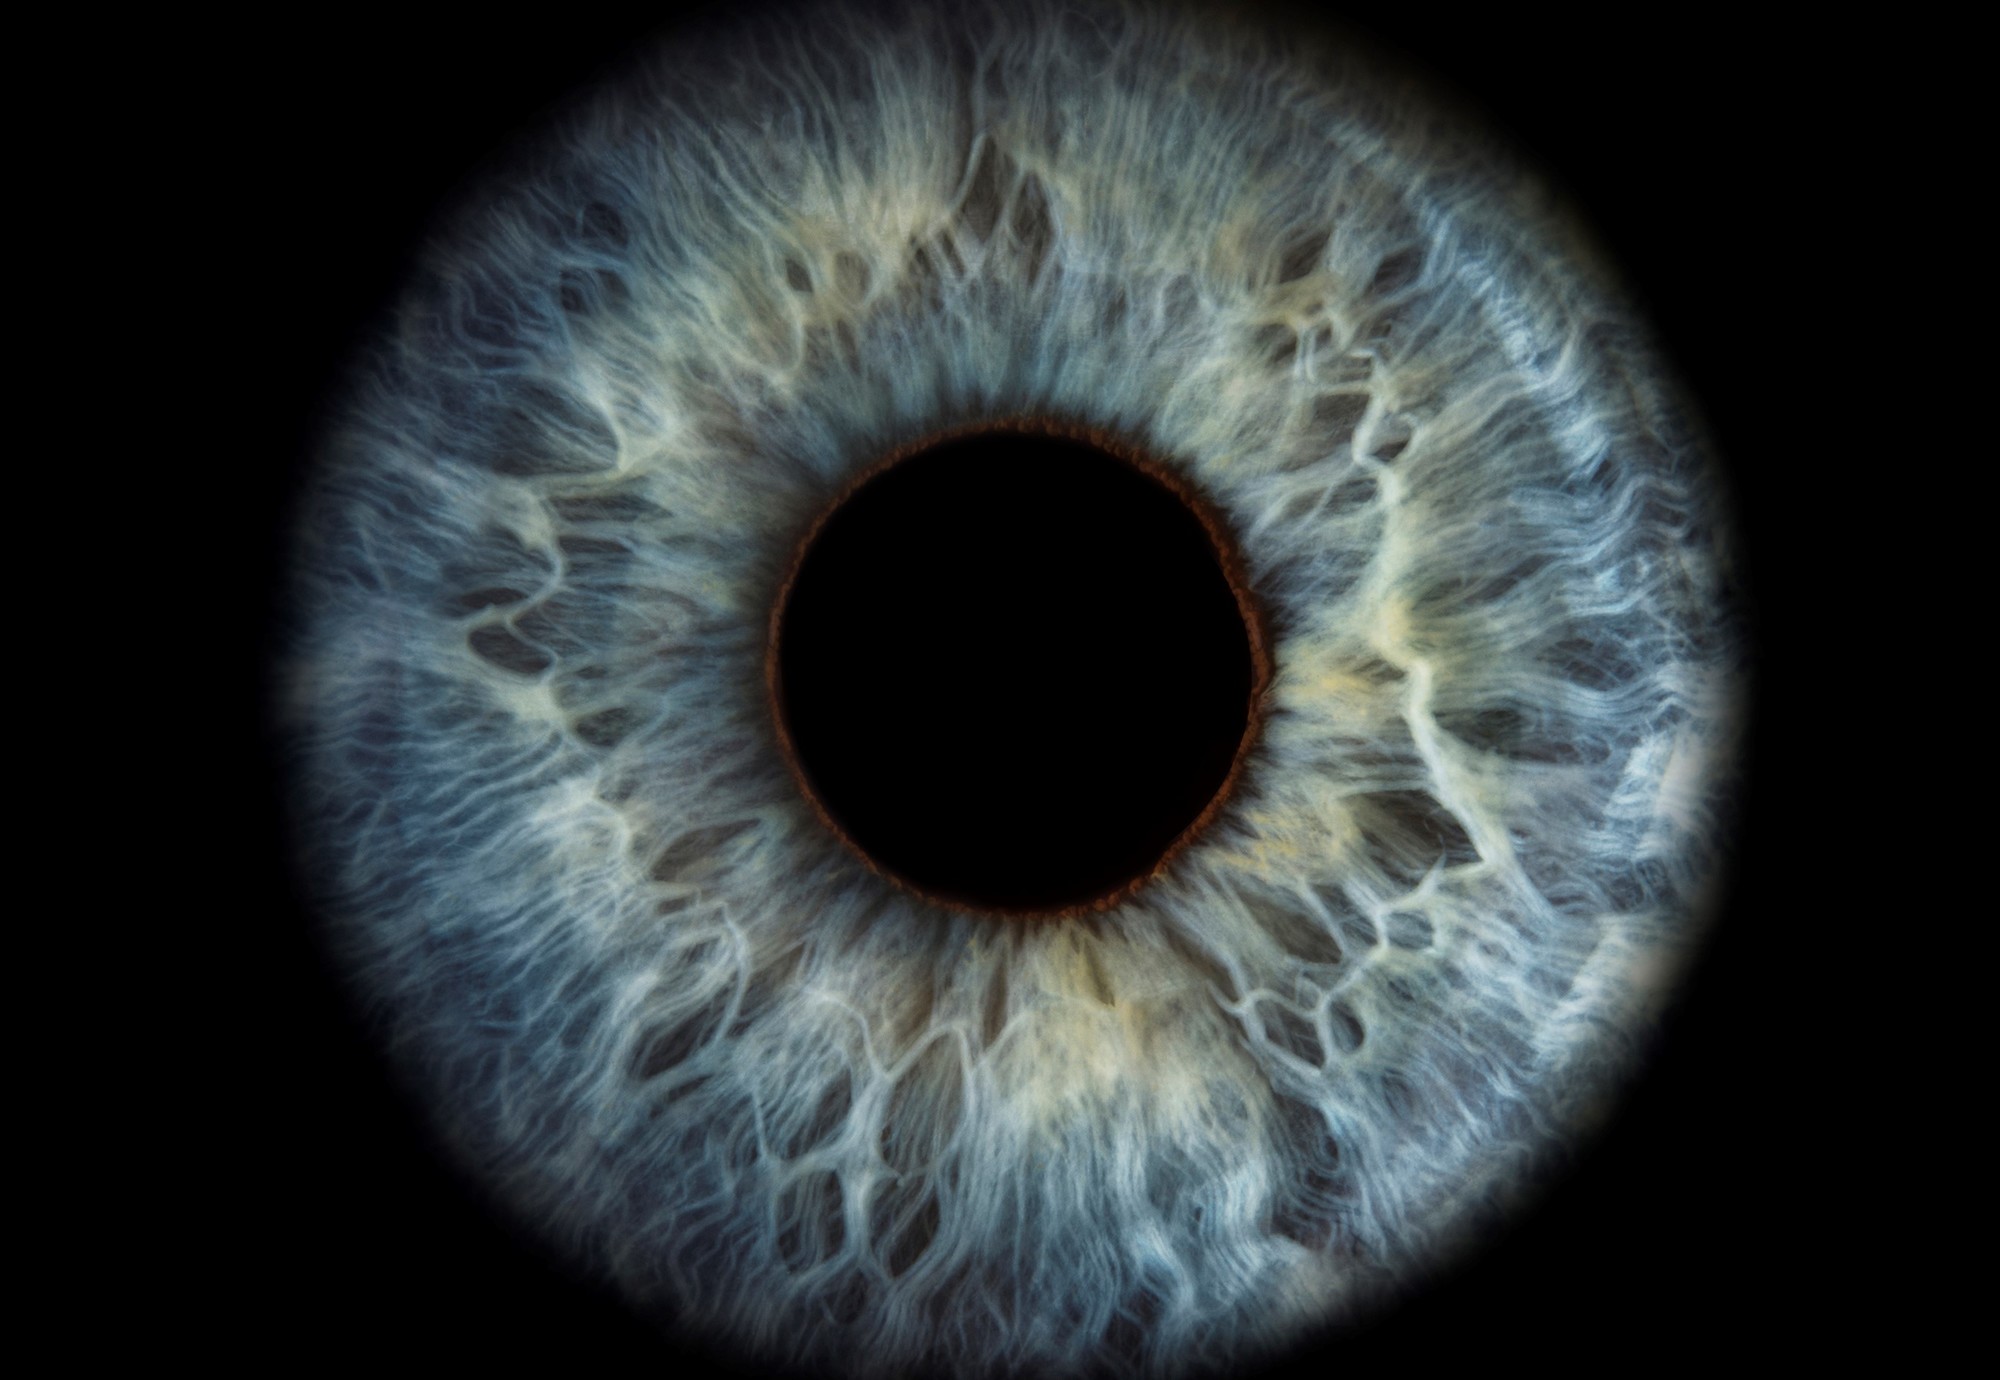 An extreme close-up of an eye, showing the iris and retina